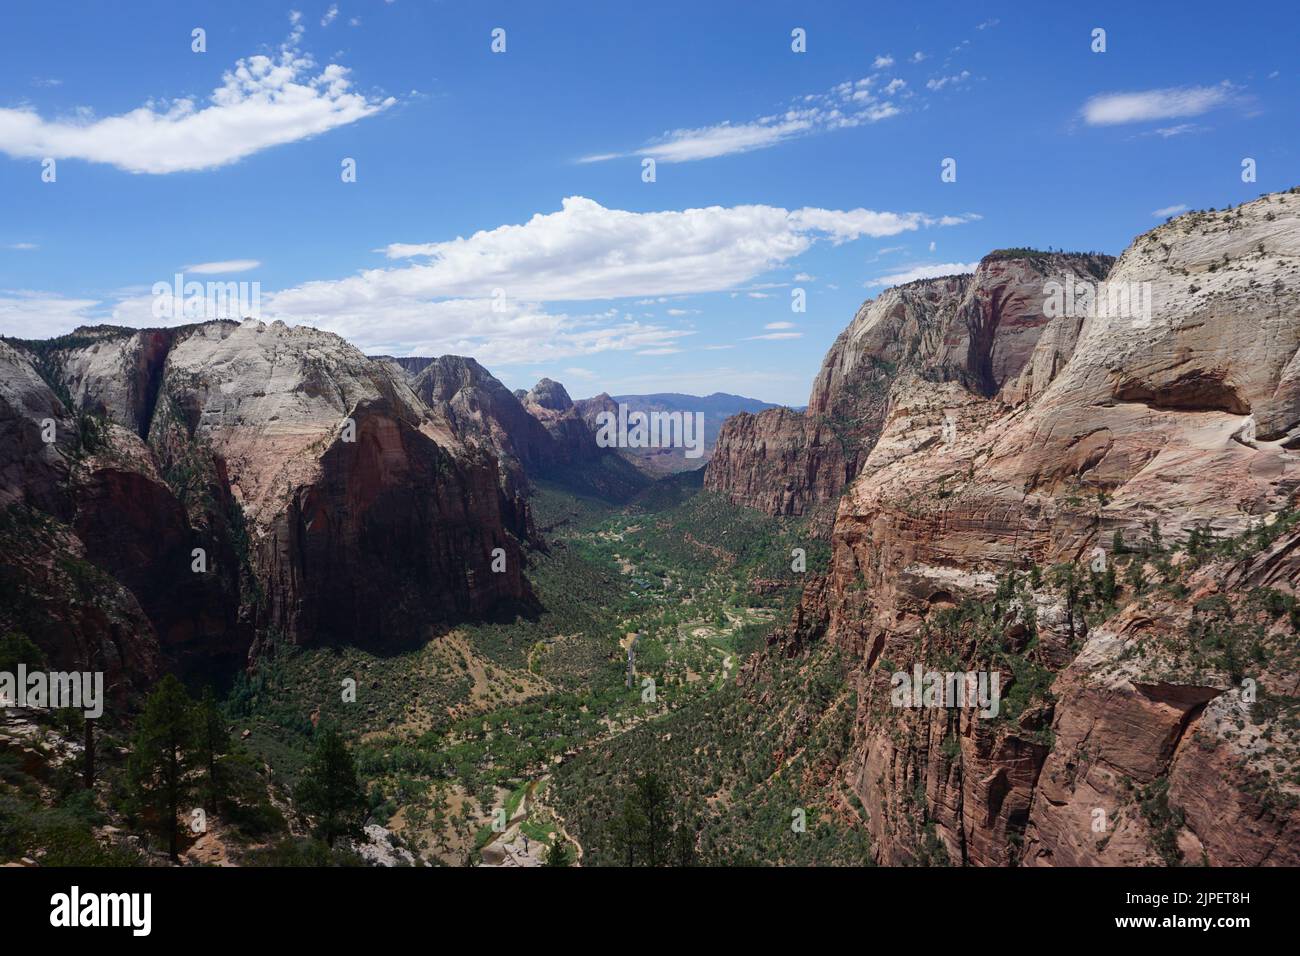 Zion National Park from on top of Angels Landing during mid day. Zion National Park, Utah, United States Stock Photo